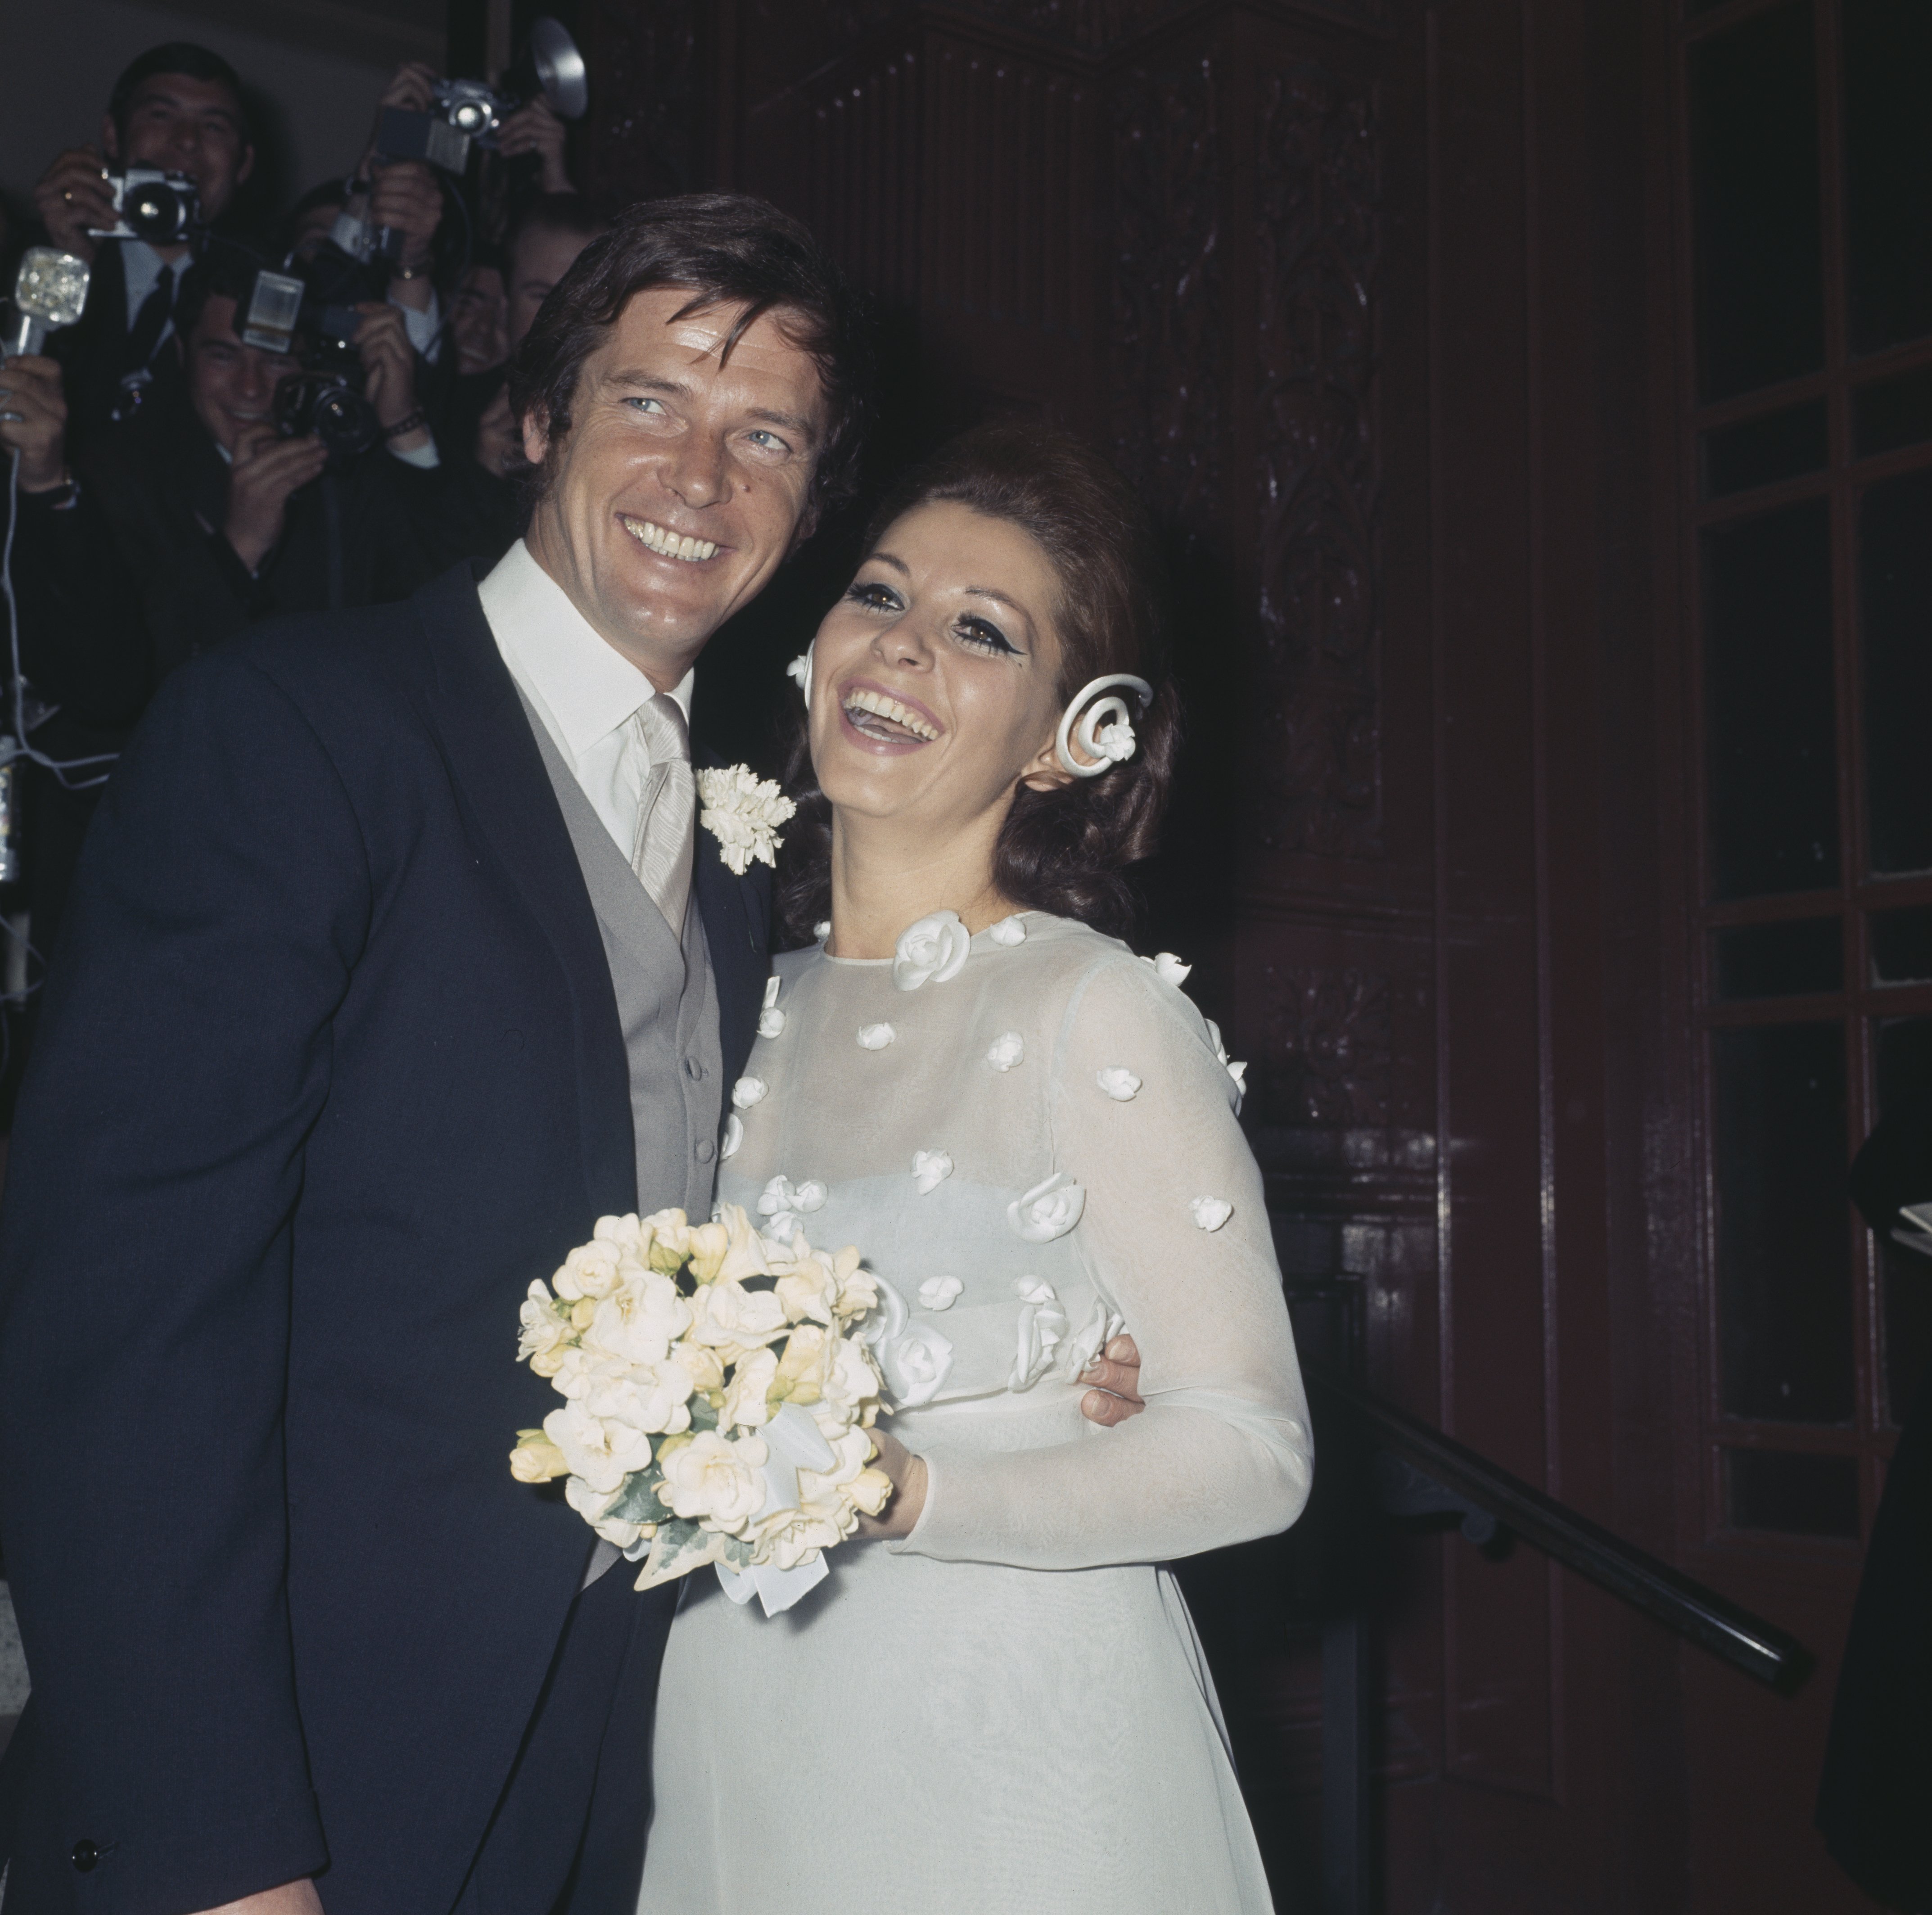 Actor Roger Moore pictured with his new wife, Italian actress Luisa Mattioli on their wedding day outside Caxton Hall in London on April 11, 1969 | Source: Getty Images